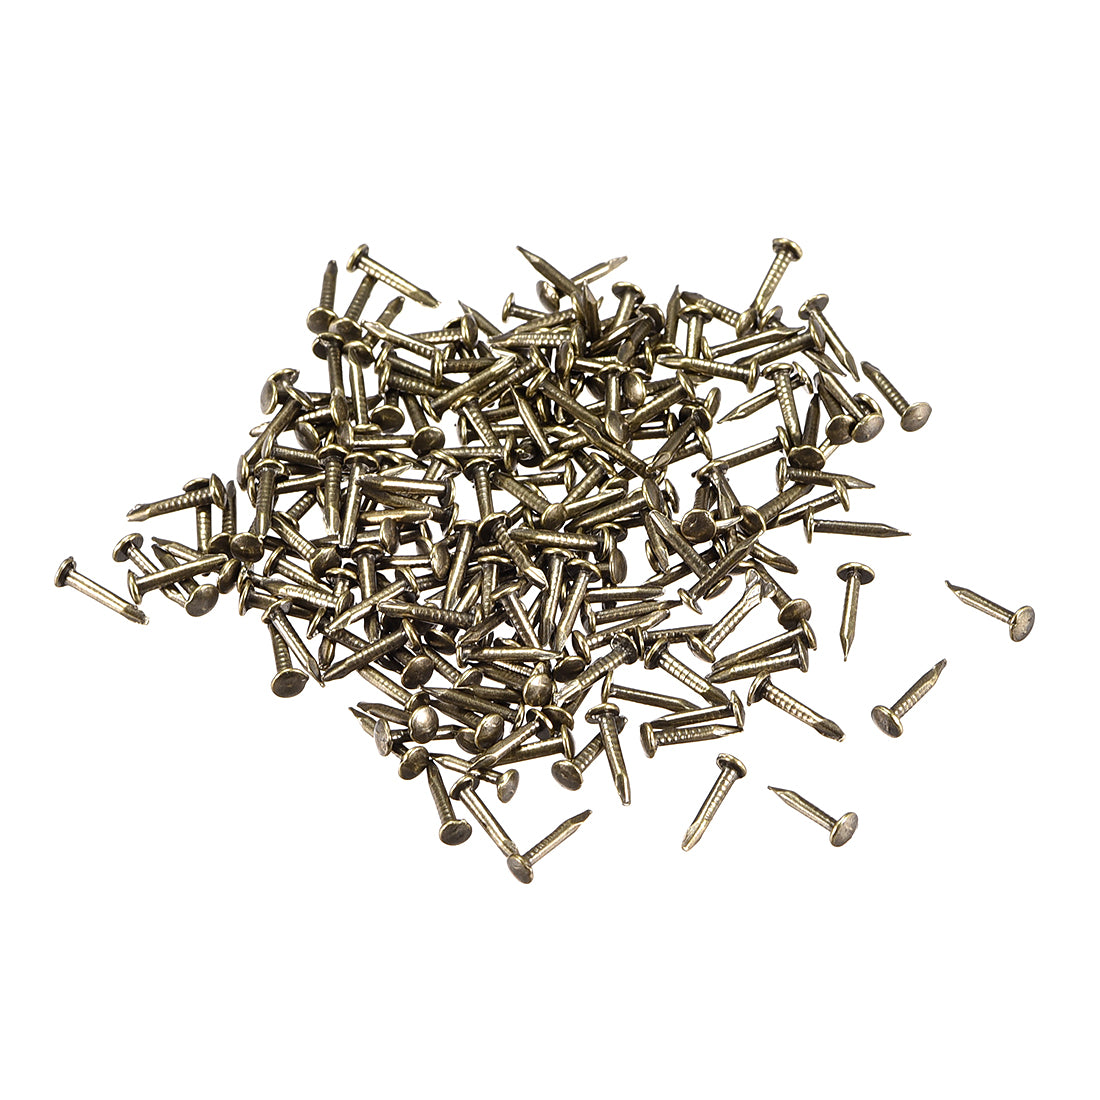 uxcell Uxcell Small Tiny Nails 1.2X8mm for DIY Decorative Wooden Boxes Bronze Tone 300pcs